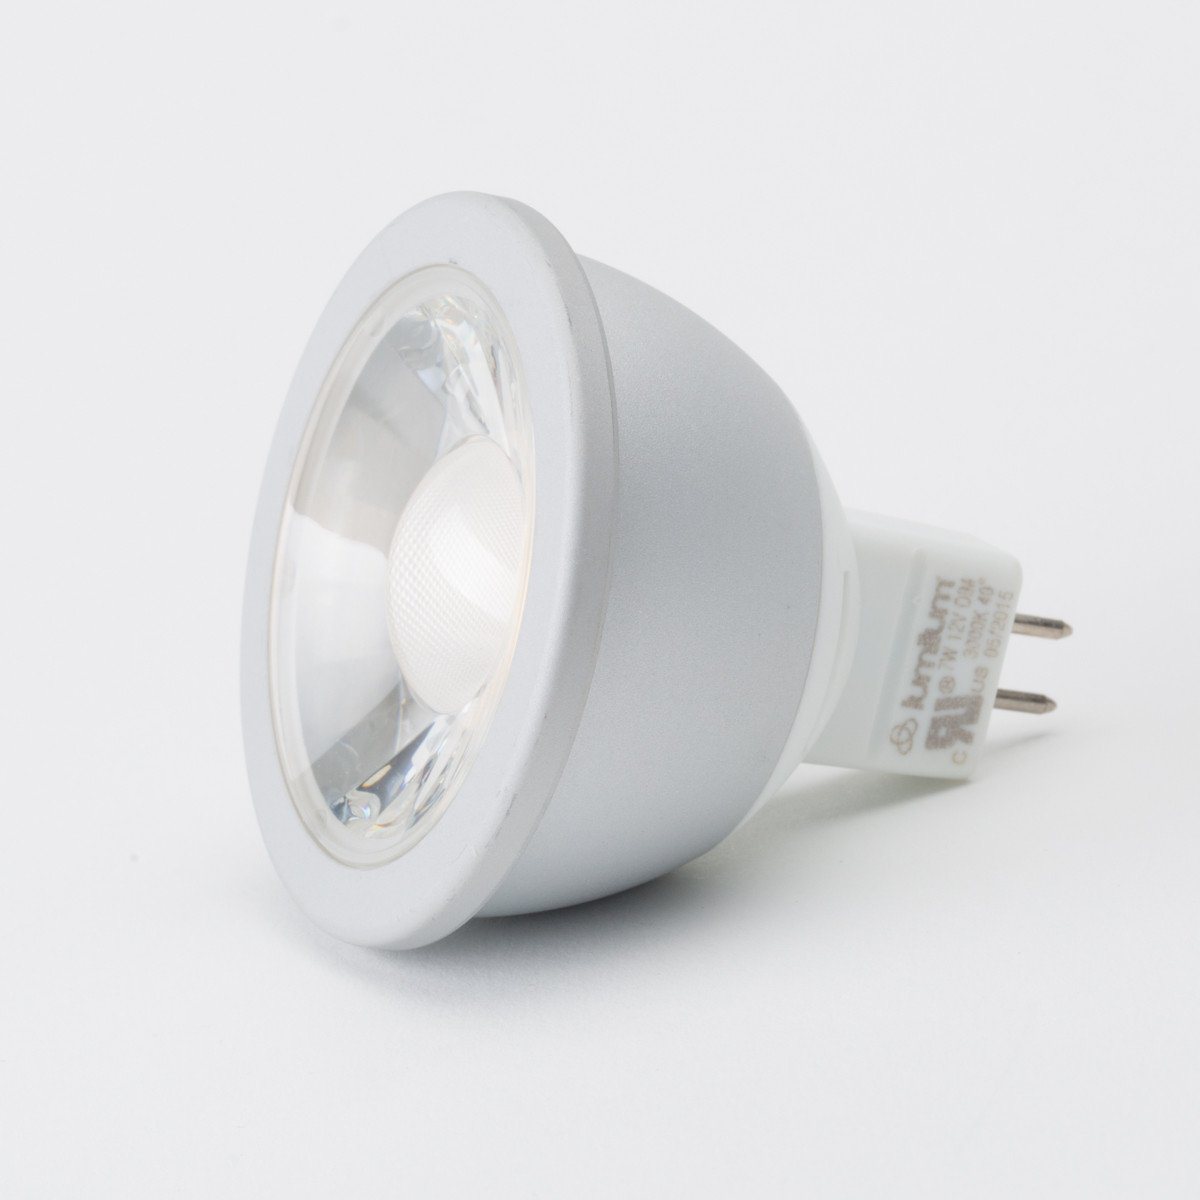 12V MR16 Small Dimmable LED Light Bulbs from Lumilum